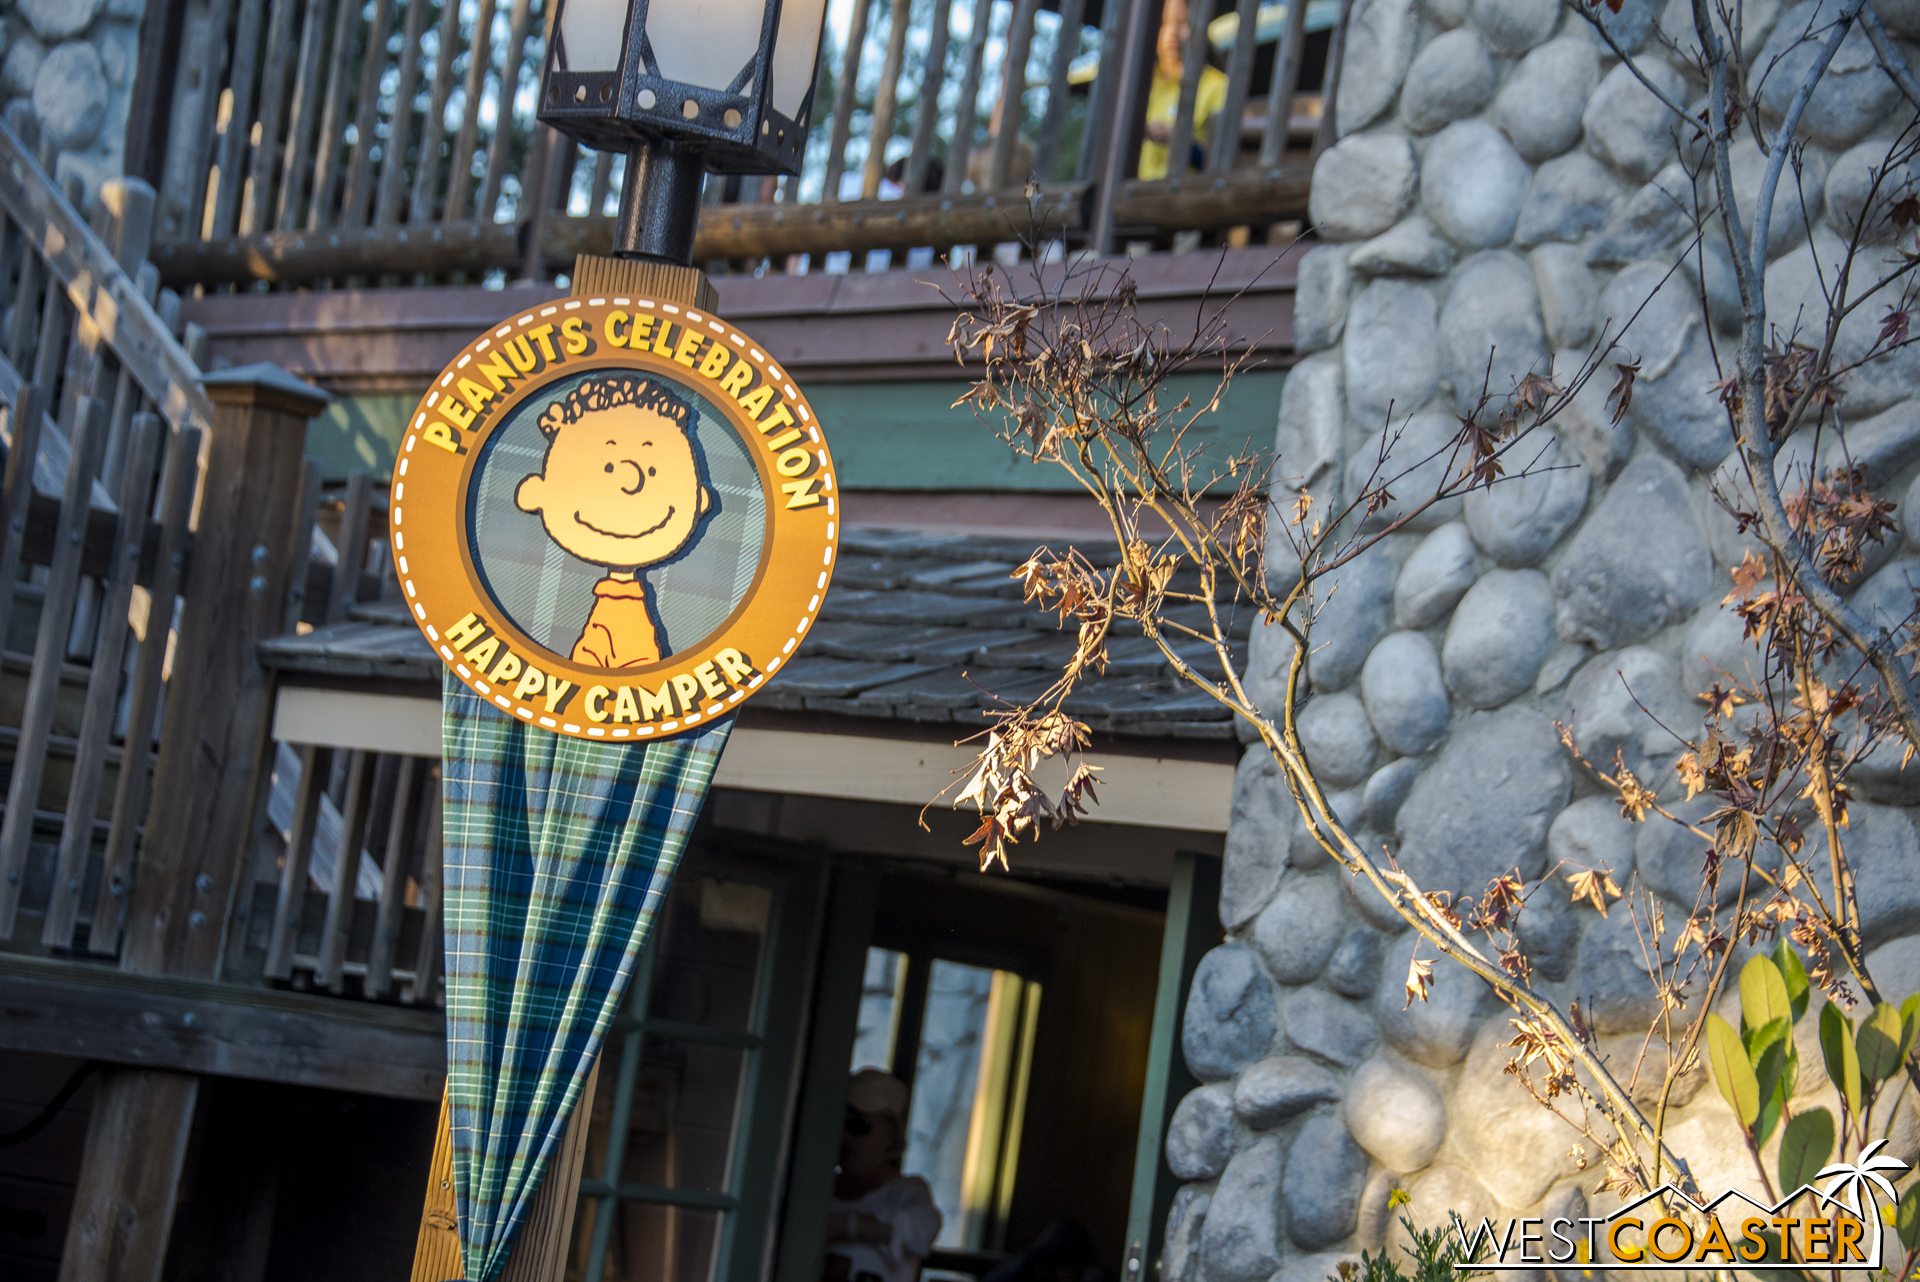  Banners for the Peanuts Celebration can be found throughout Camp Snoopy, but also elsewhere in the park. 